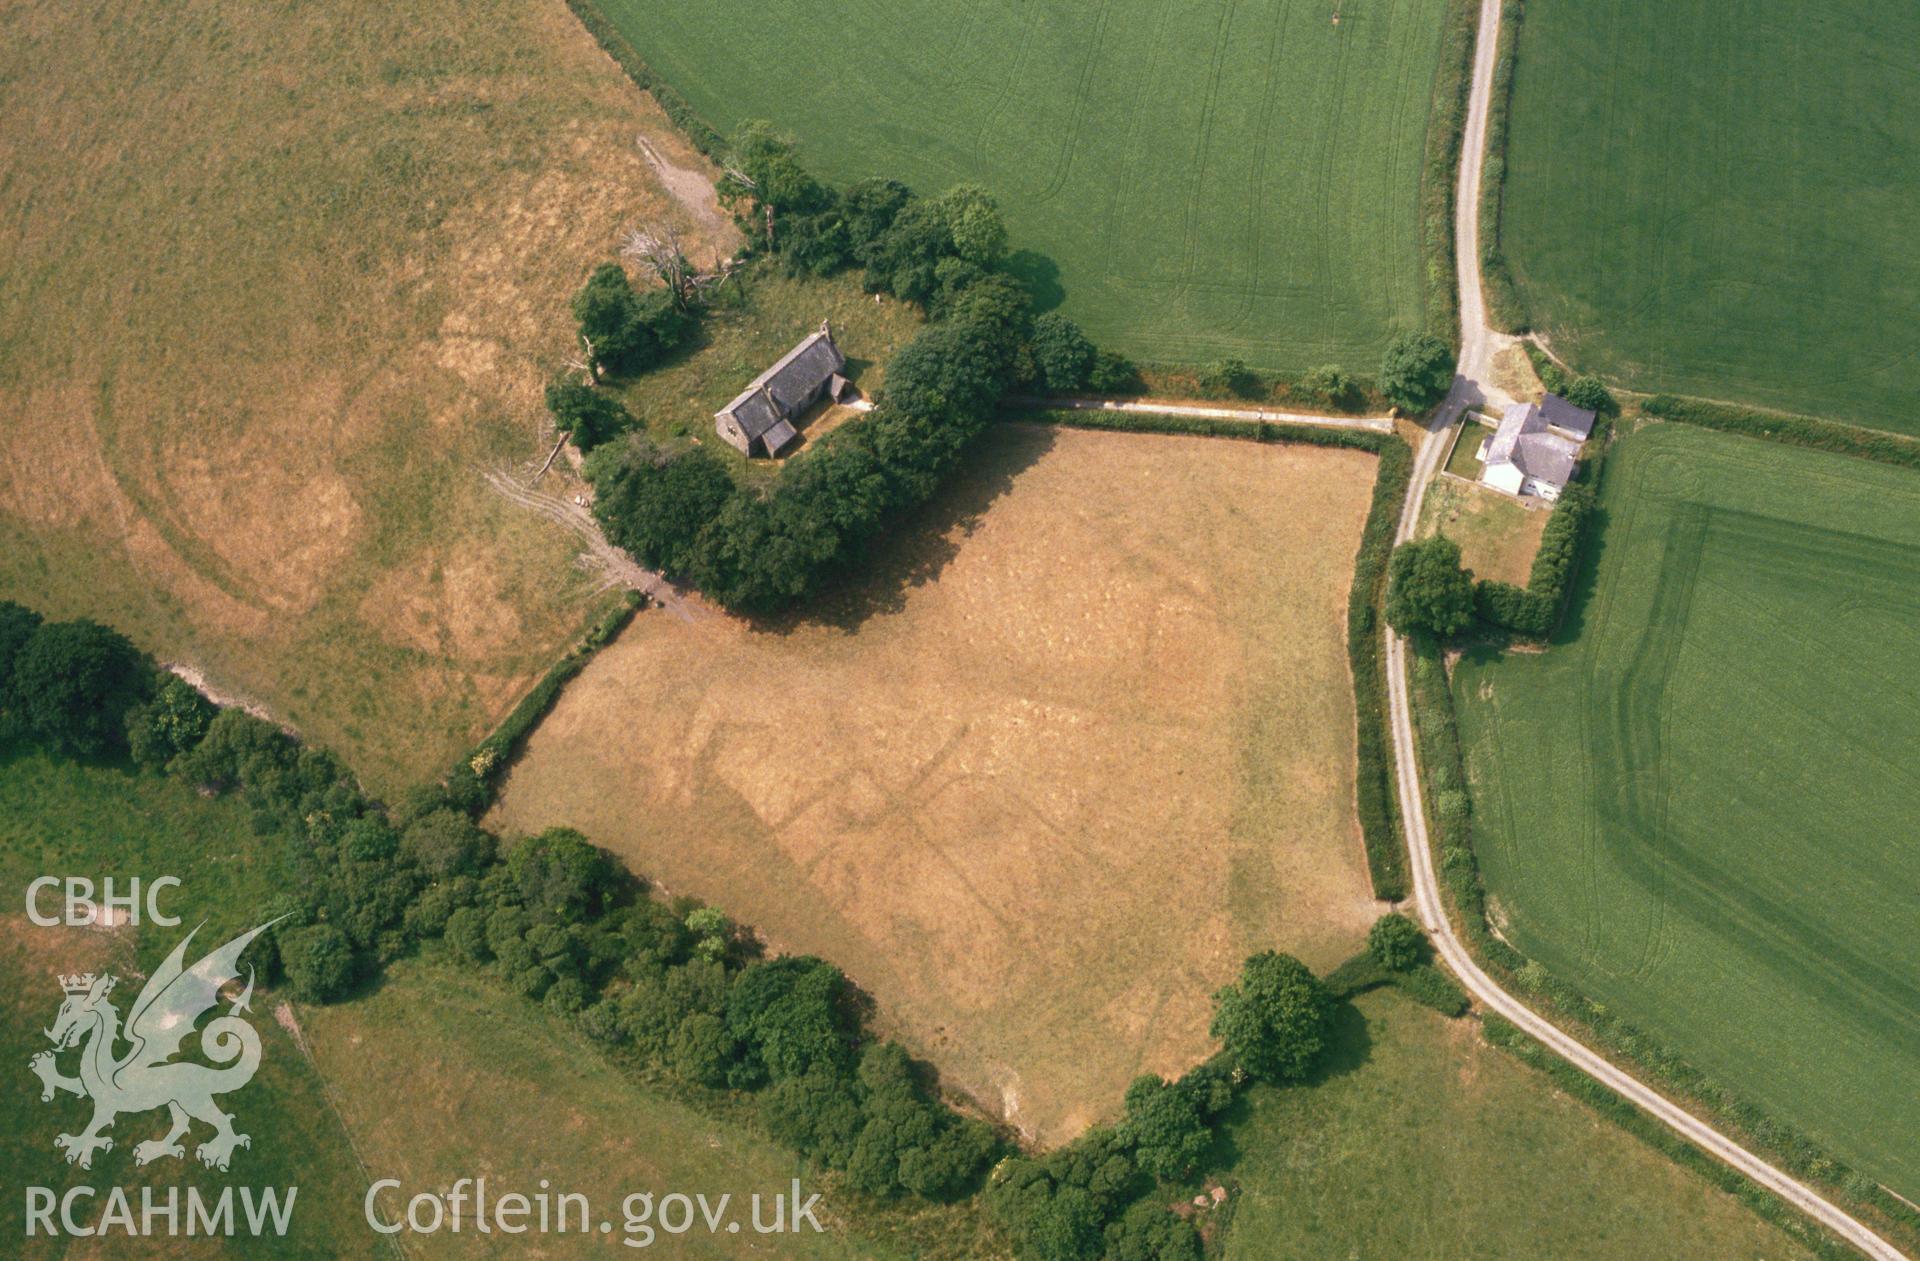 RCAHMW colour slide oblique aerial photograph of St Canna's, Henllanfallteg, taken on 27/06/1992 by CR Musson